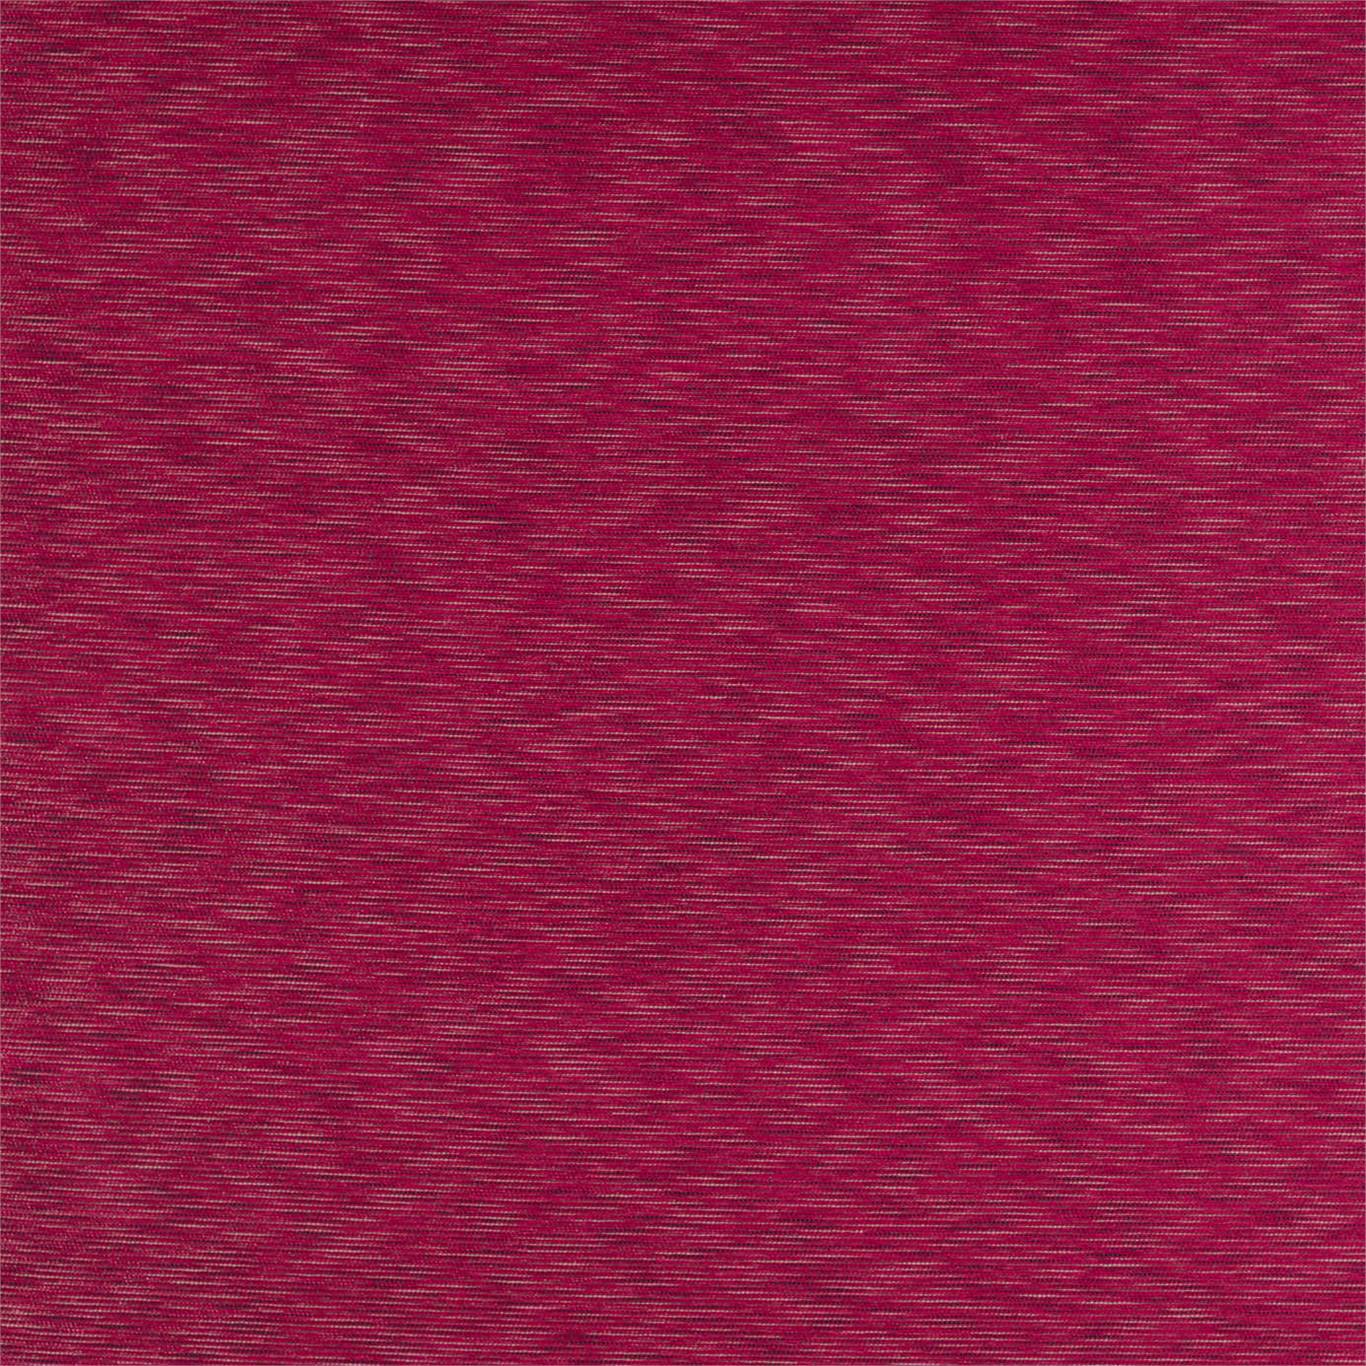 Lineate Cerise Fabric by HAR